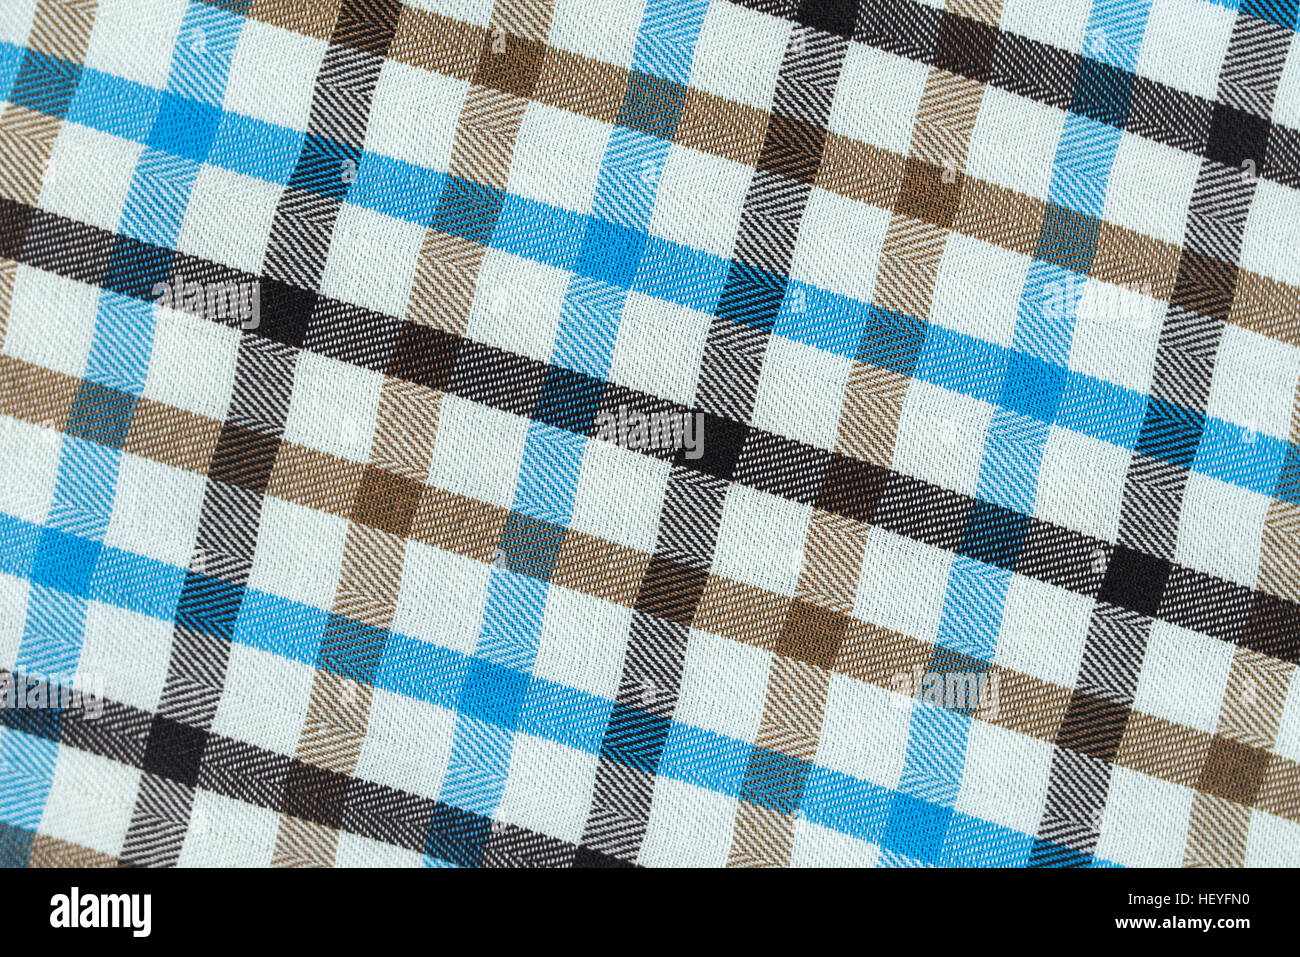 A scacchi in plaid shirt texture pattern, close up Foto Stock